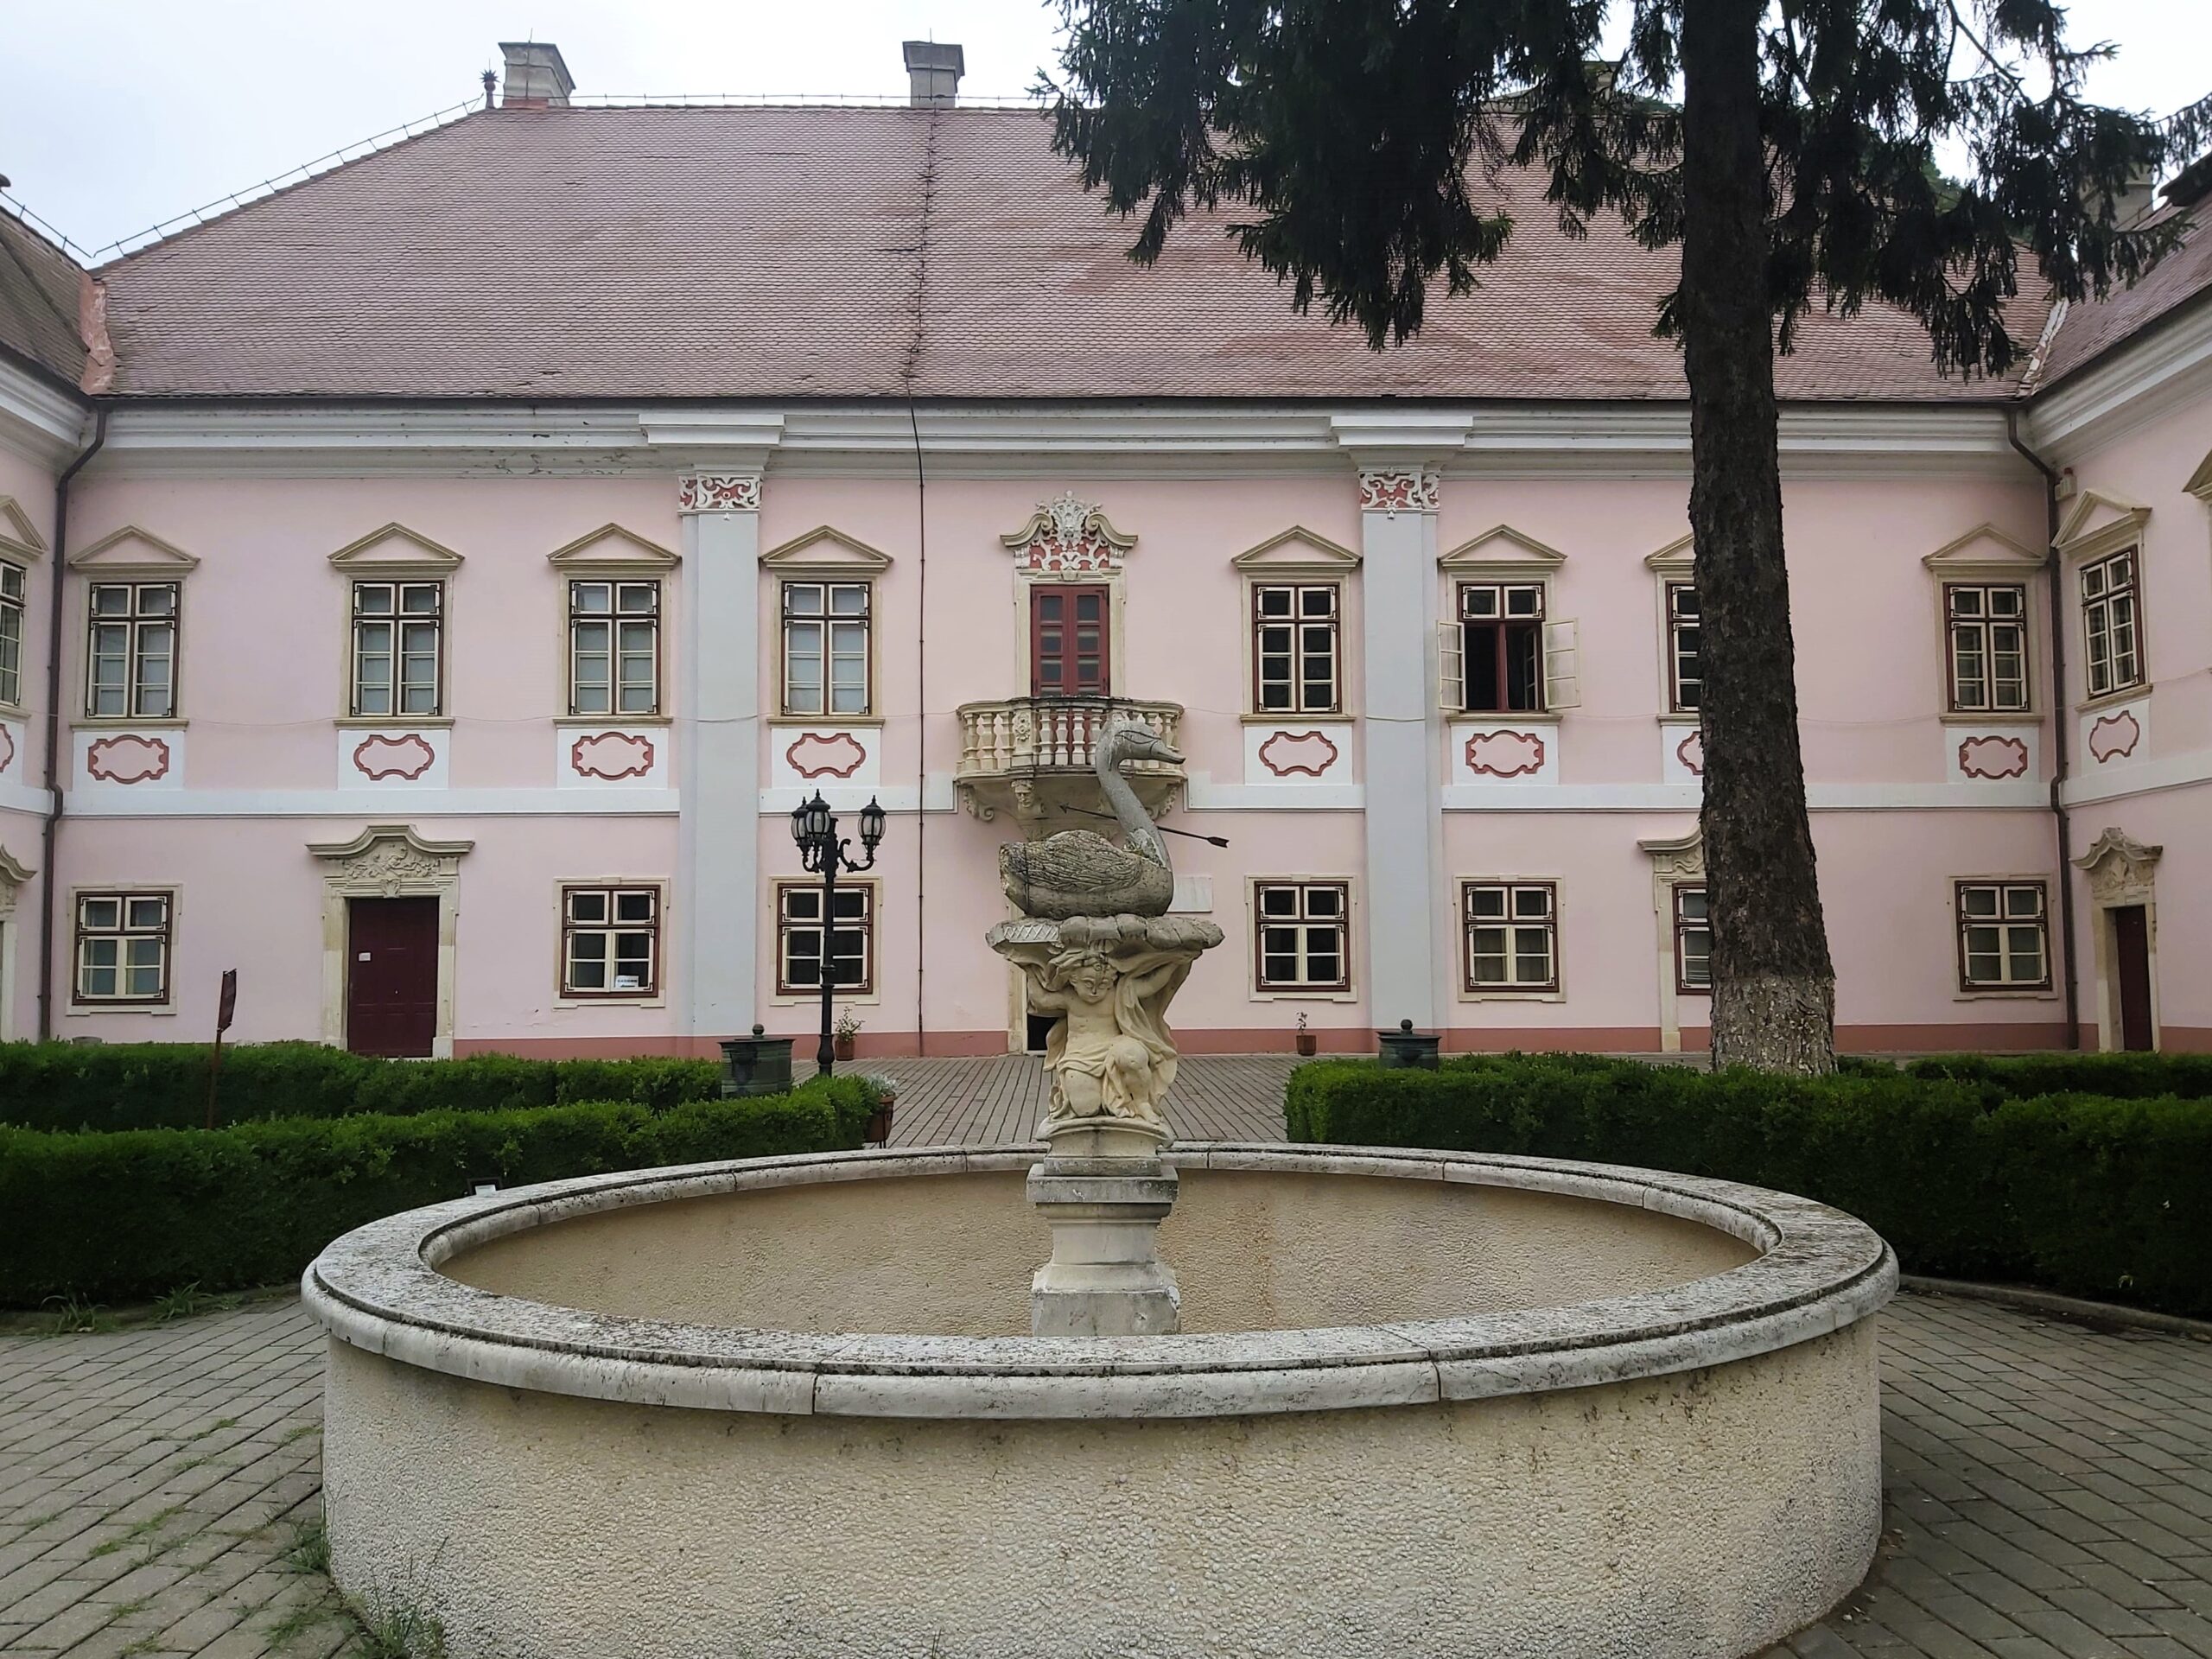 A carved fountain of a goose pierced with an arrow and pink Museum of Dacian and Roman Civilization building in the background in Deva, Romania